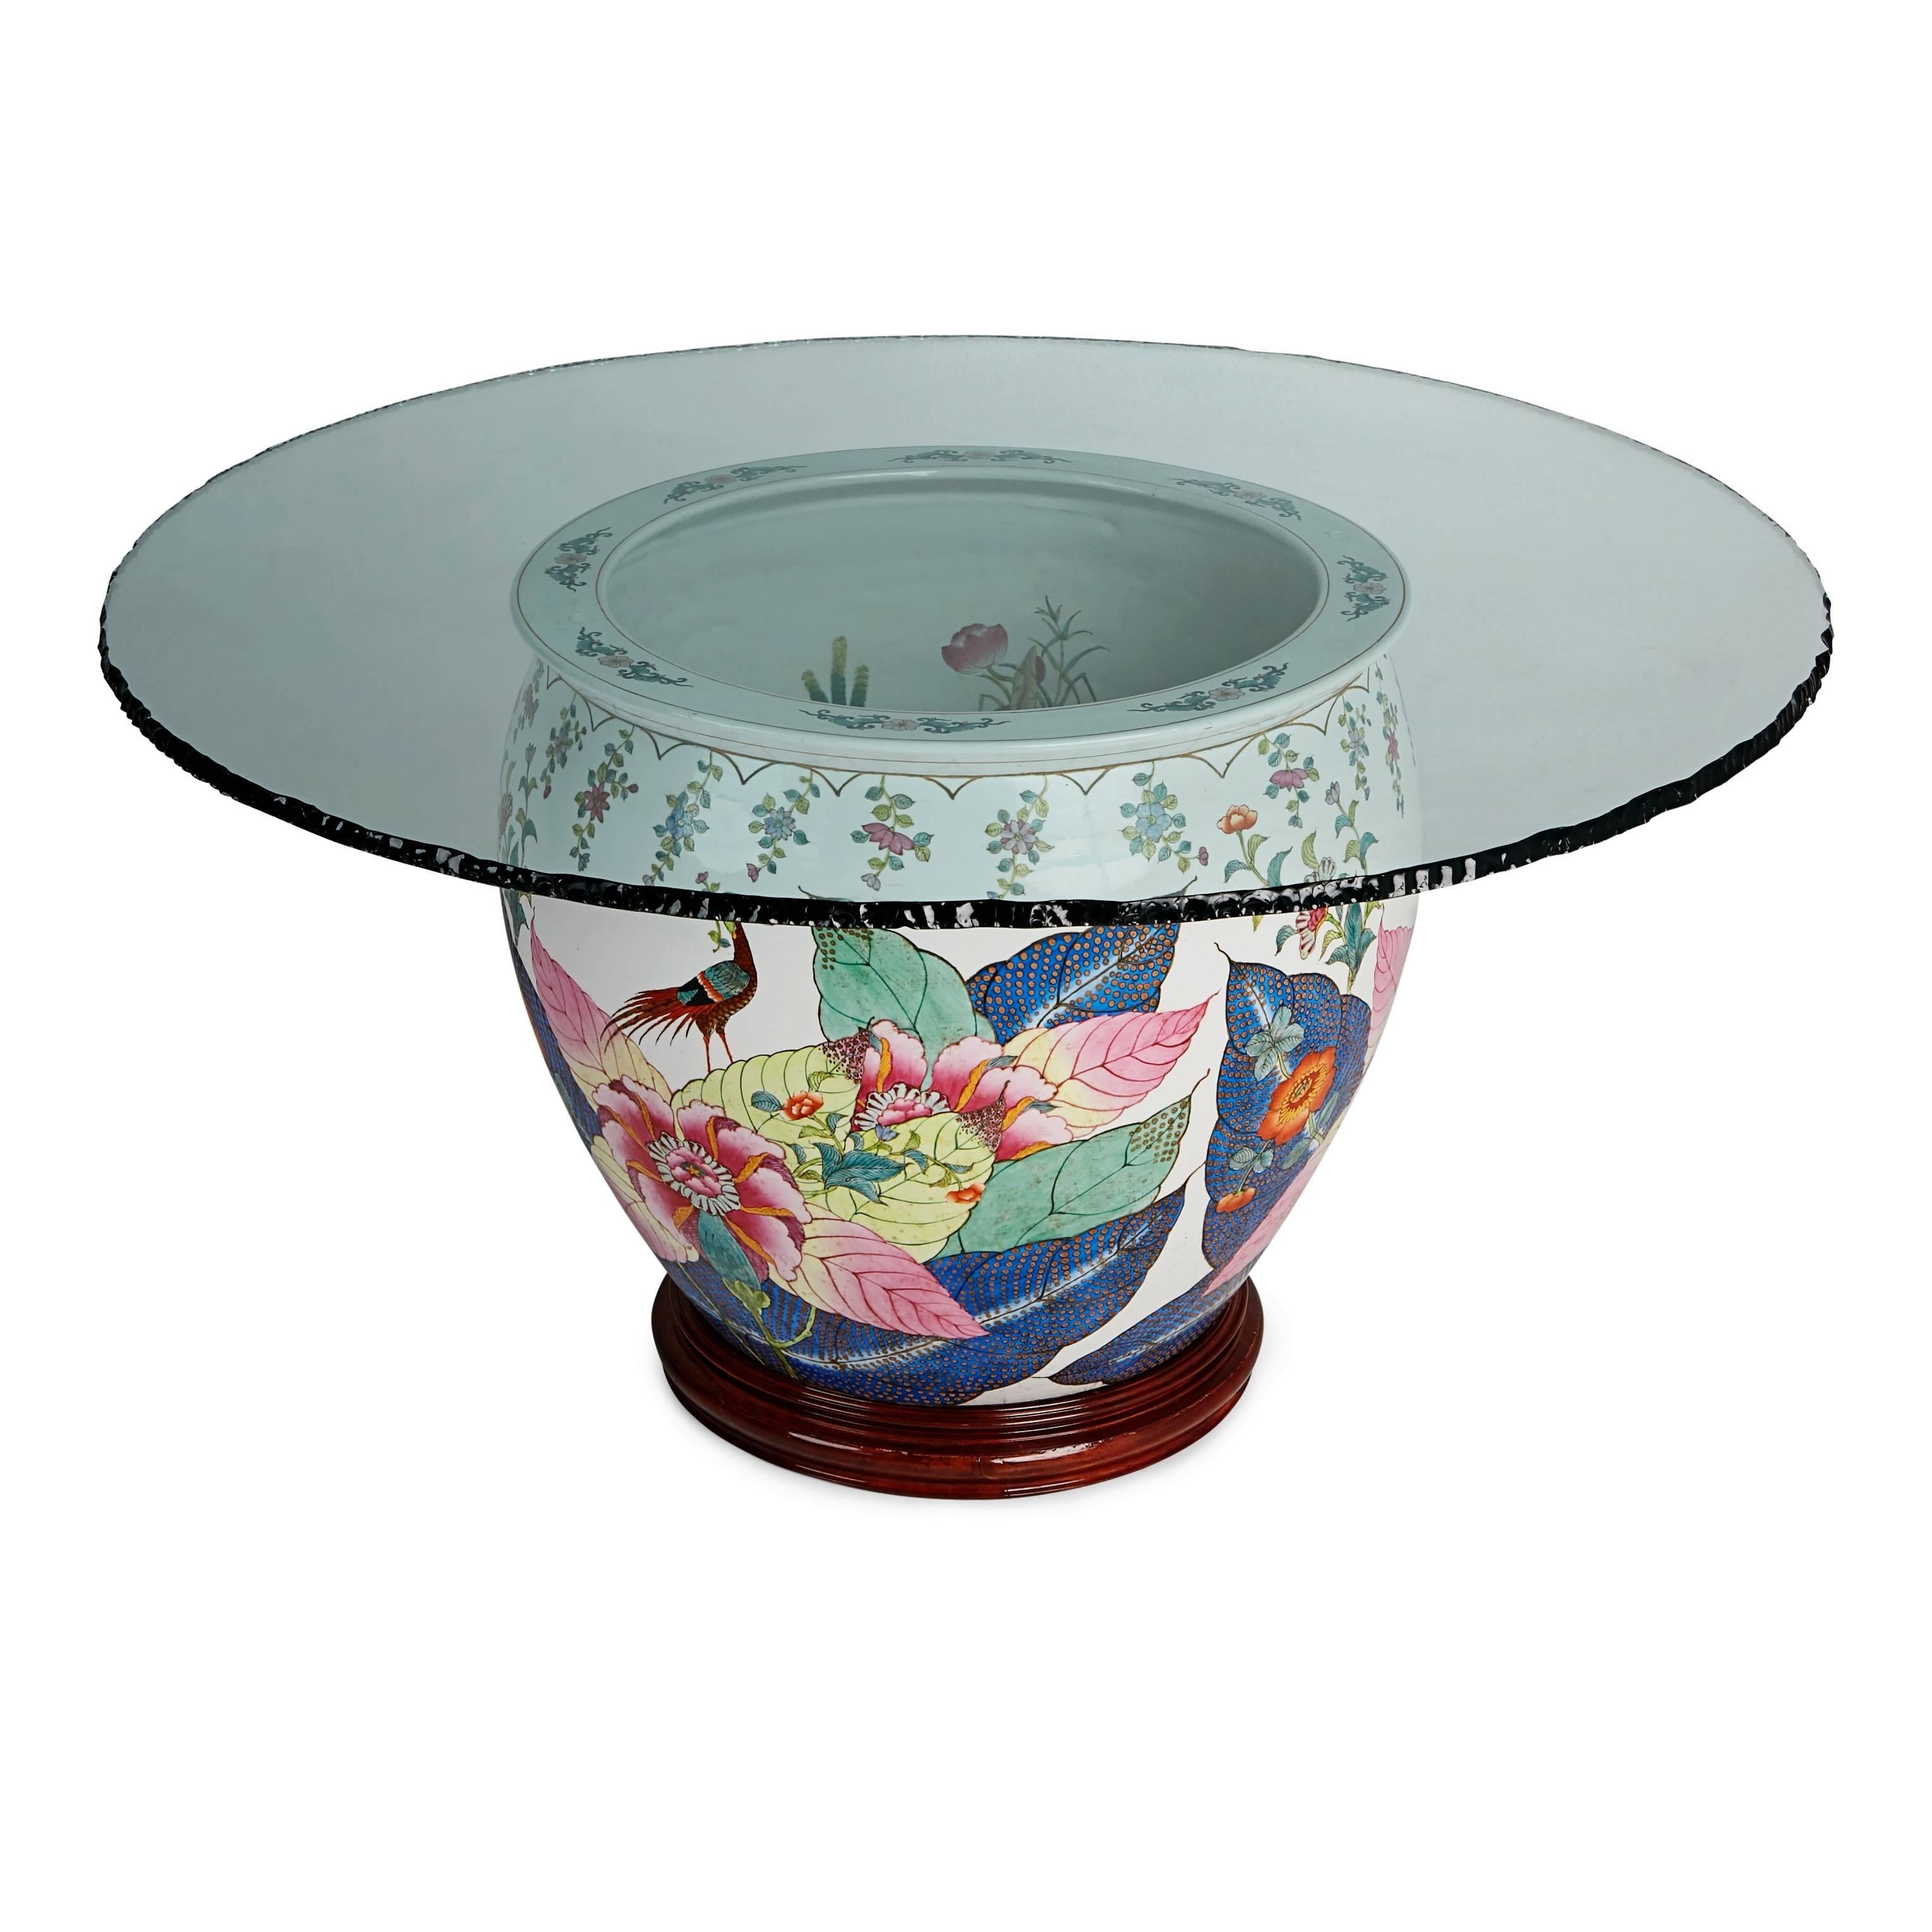 Chinoiserie Asian Glazed Porcelain Urn Base Dining Table with Fractured Edge Glass Top